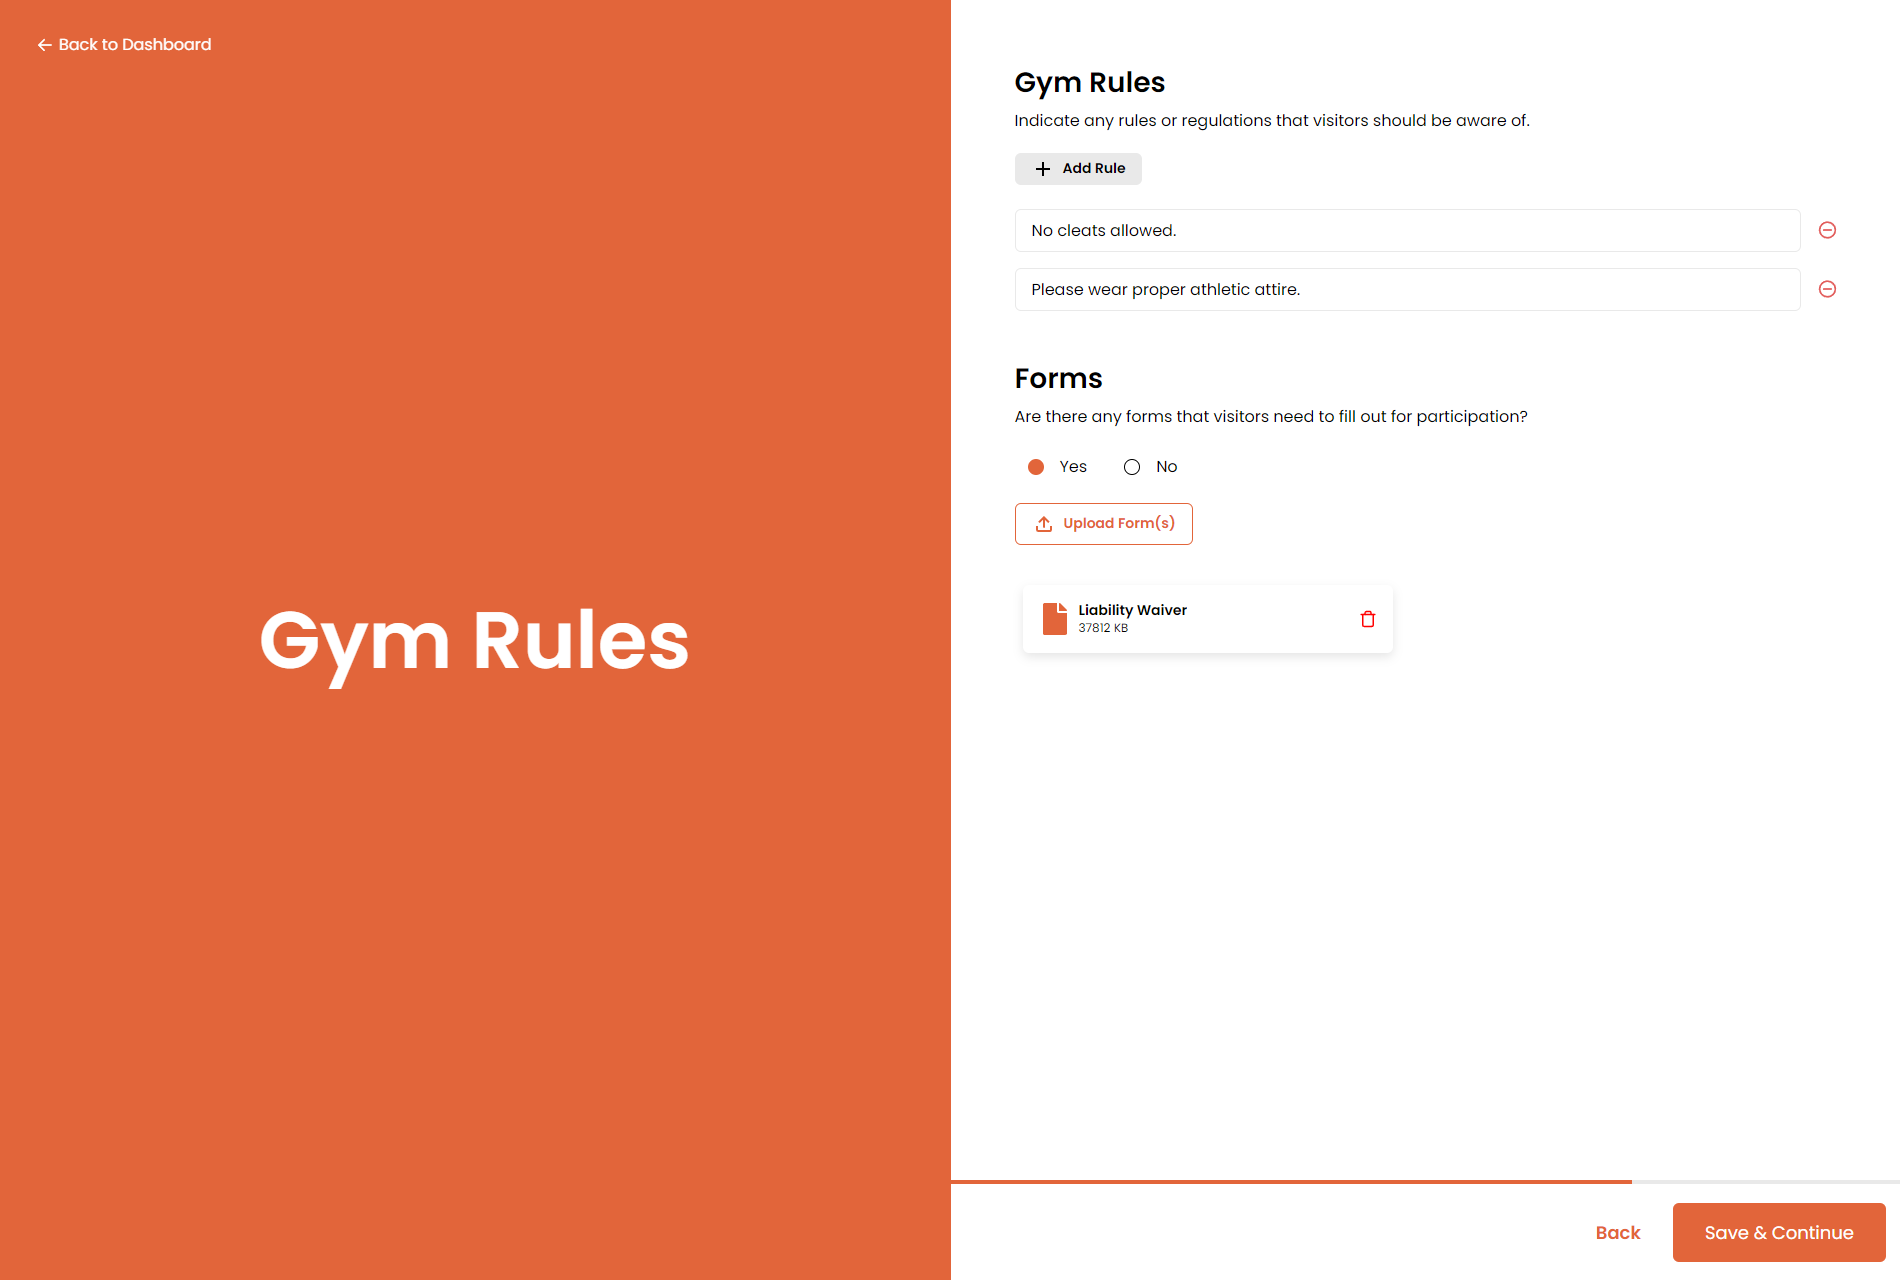 List gym rules and forms/waivers.